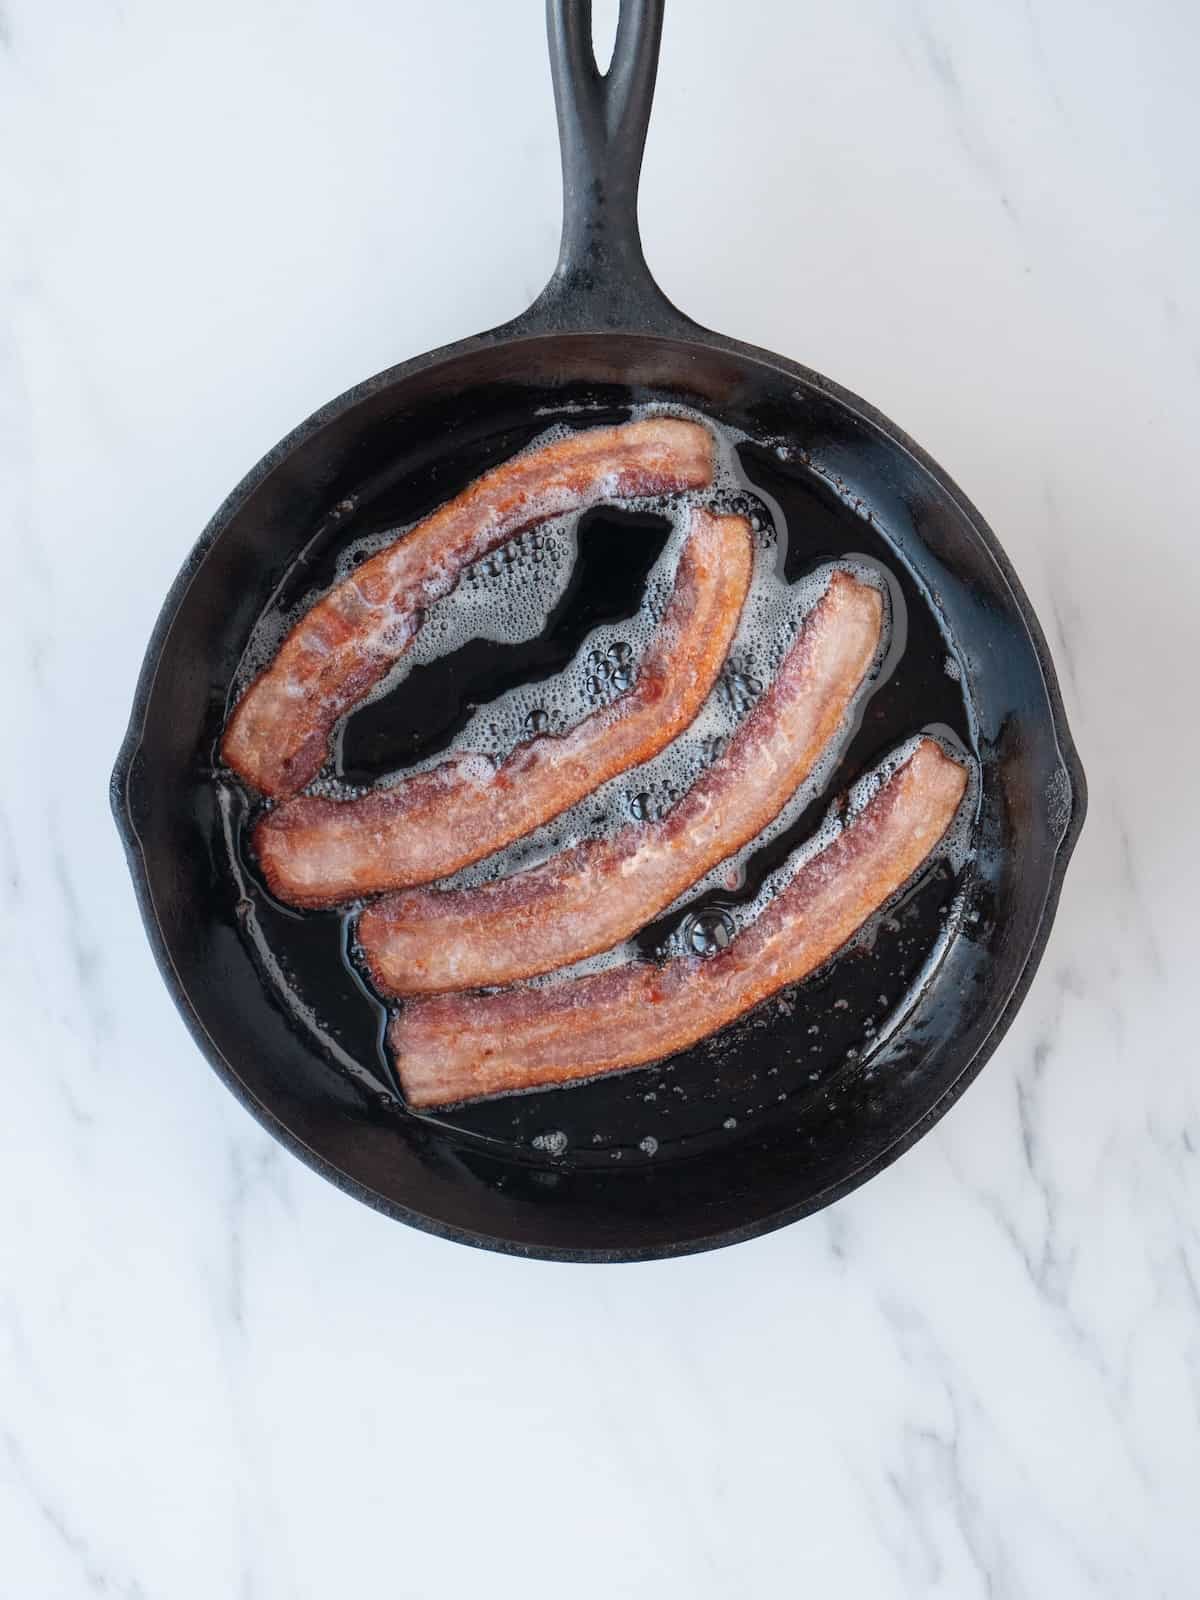 A skillet with thinly sliced bacon being cooked.